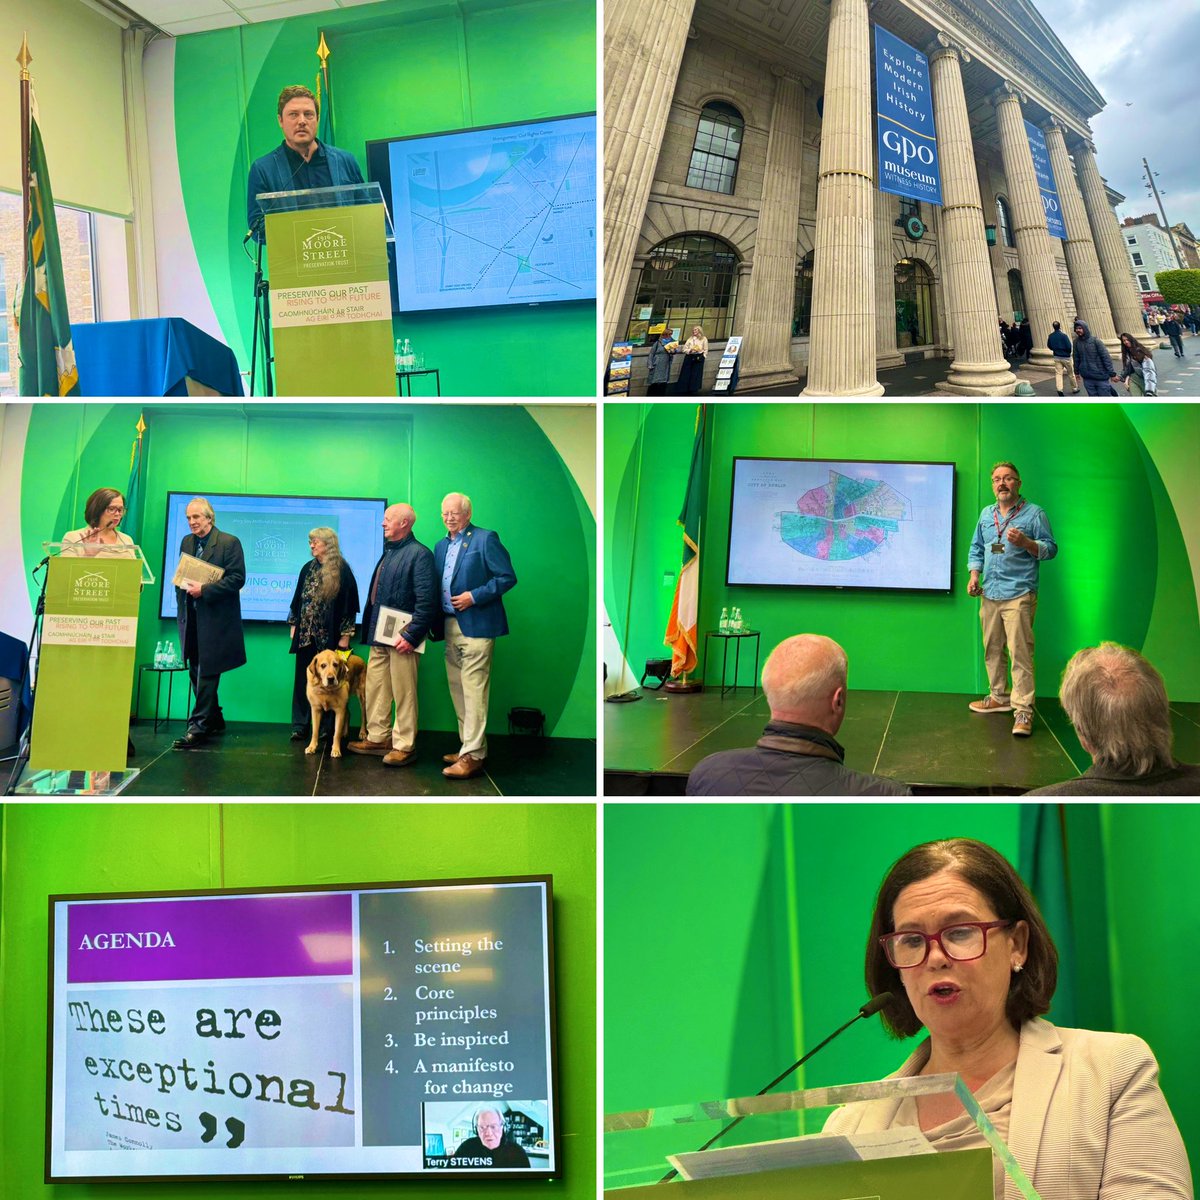 Today marks the 108th anniversary of the Easter Rising of 1916. I was honoured to participate in a groundbreaking Moore Street Preservation Trust conference ‘Preserving our Past - Rising to our Future’ held in the historic @gpowithistory #SaveMooreStreet